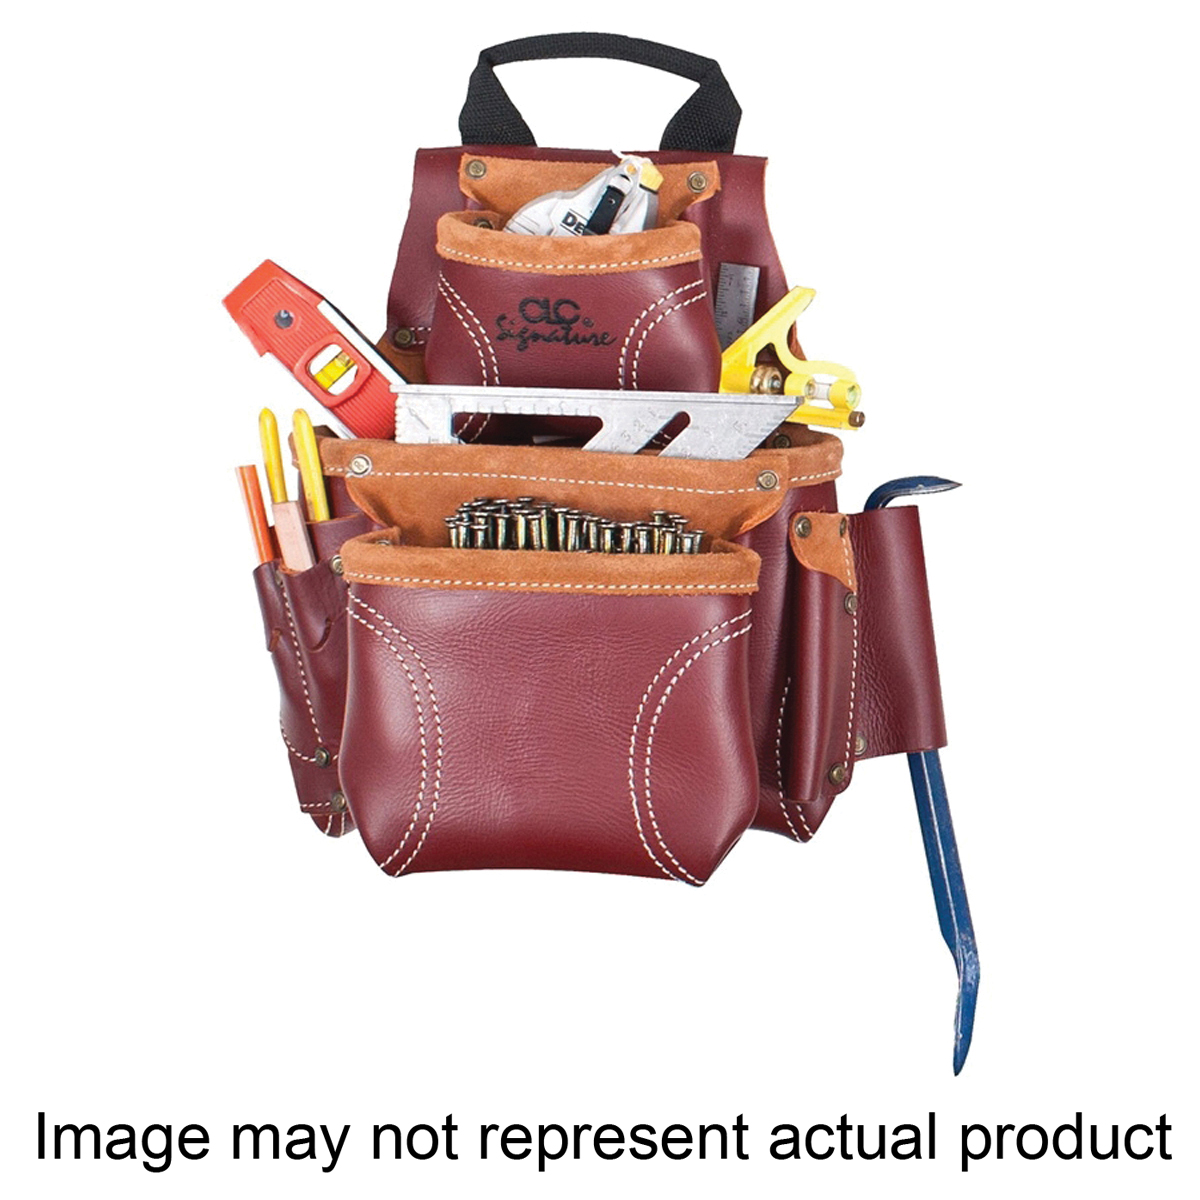 21685 Nail and Tool Bag, 8-Pocket, Leather, Chestnut